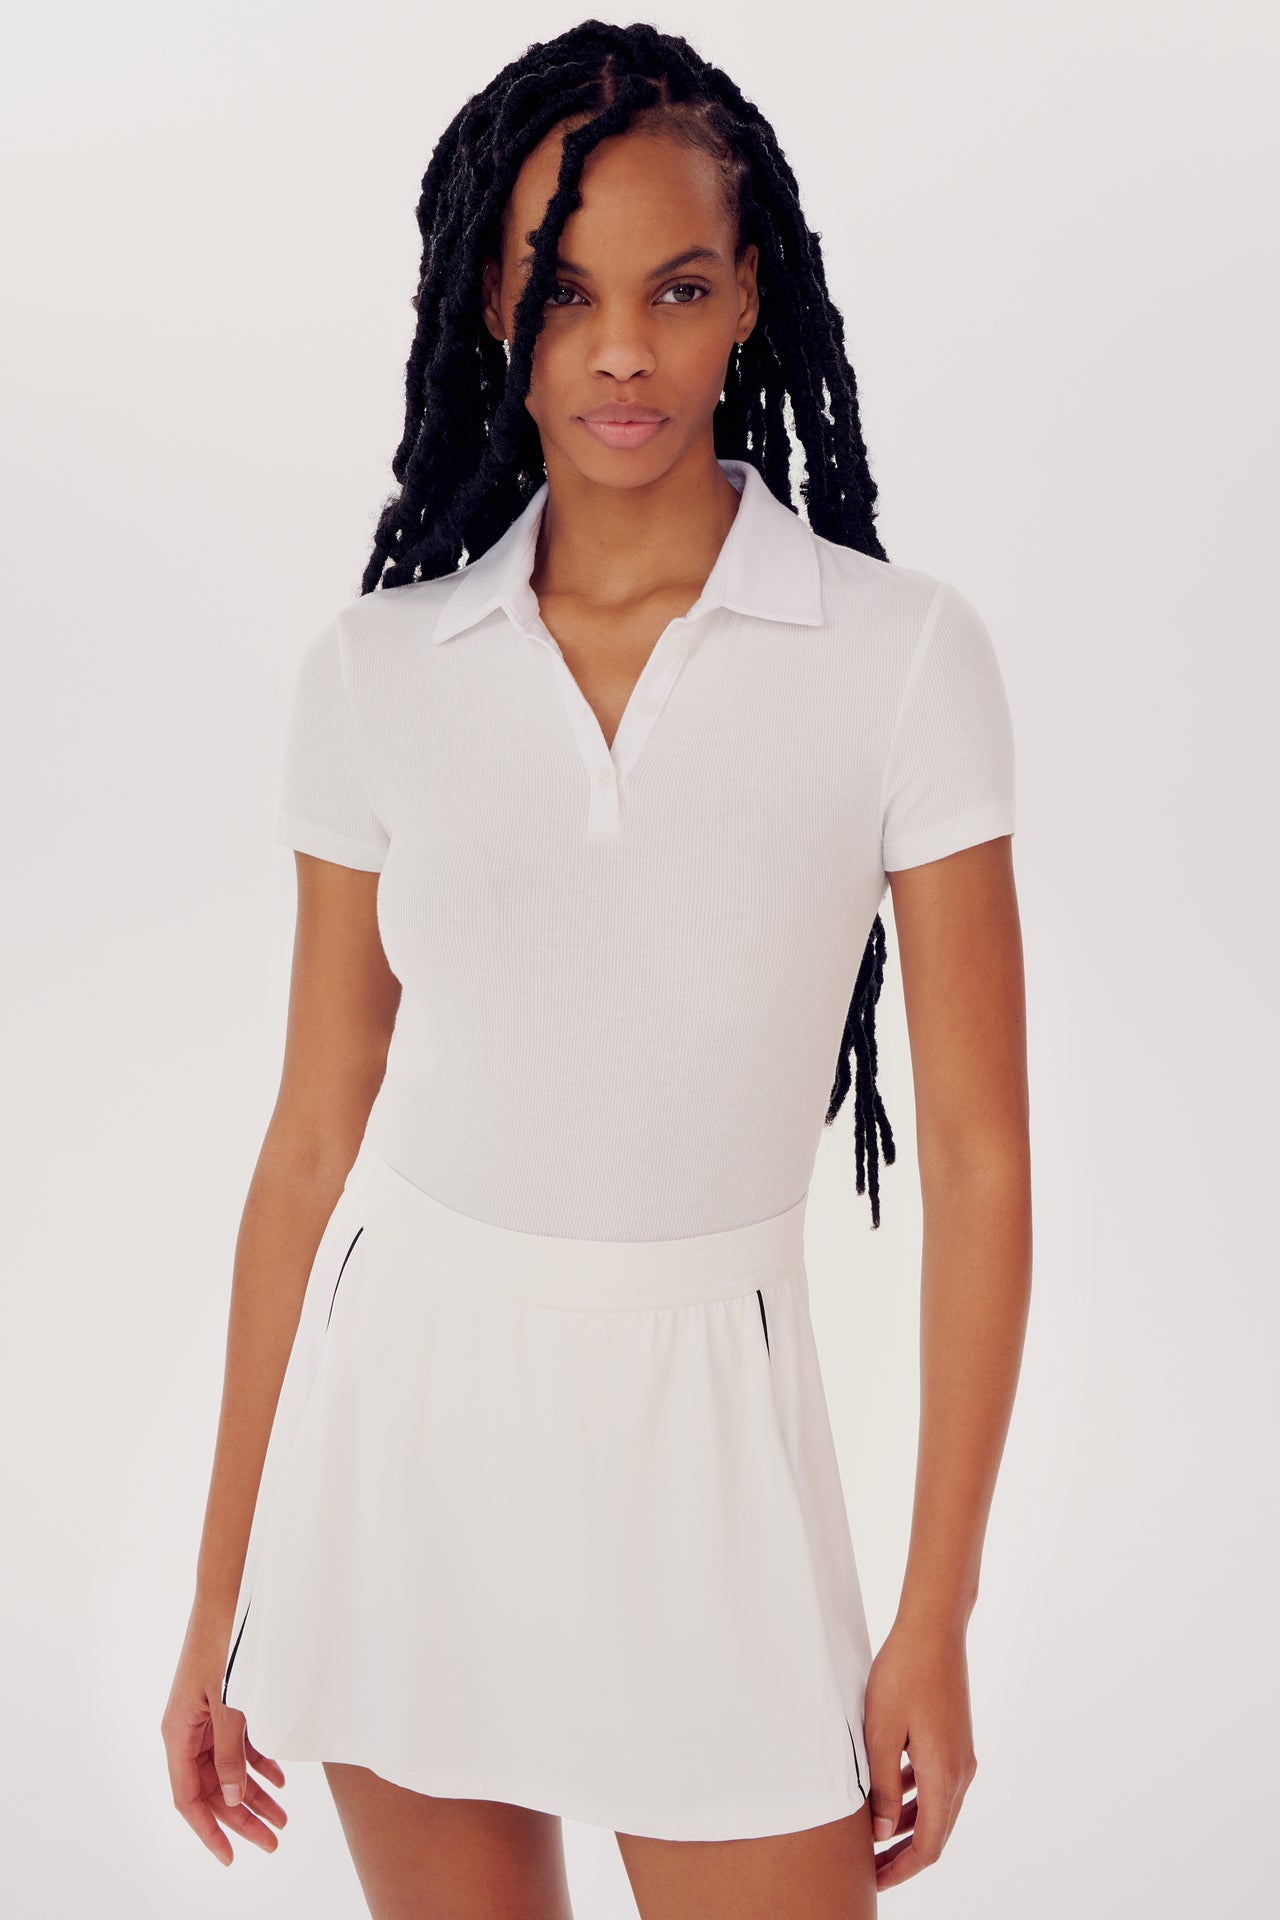 A woman wearing a SPLITS59 Talia Rib Polo in White and skirt, standing against a plain background, looks directly at the camera. Her hair is styled in long black braids for yoga.